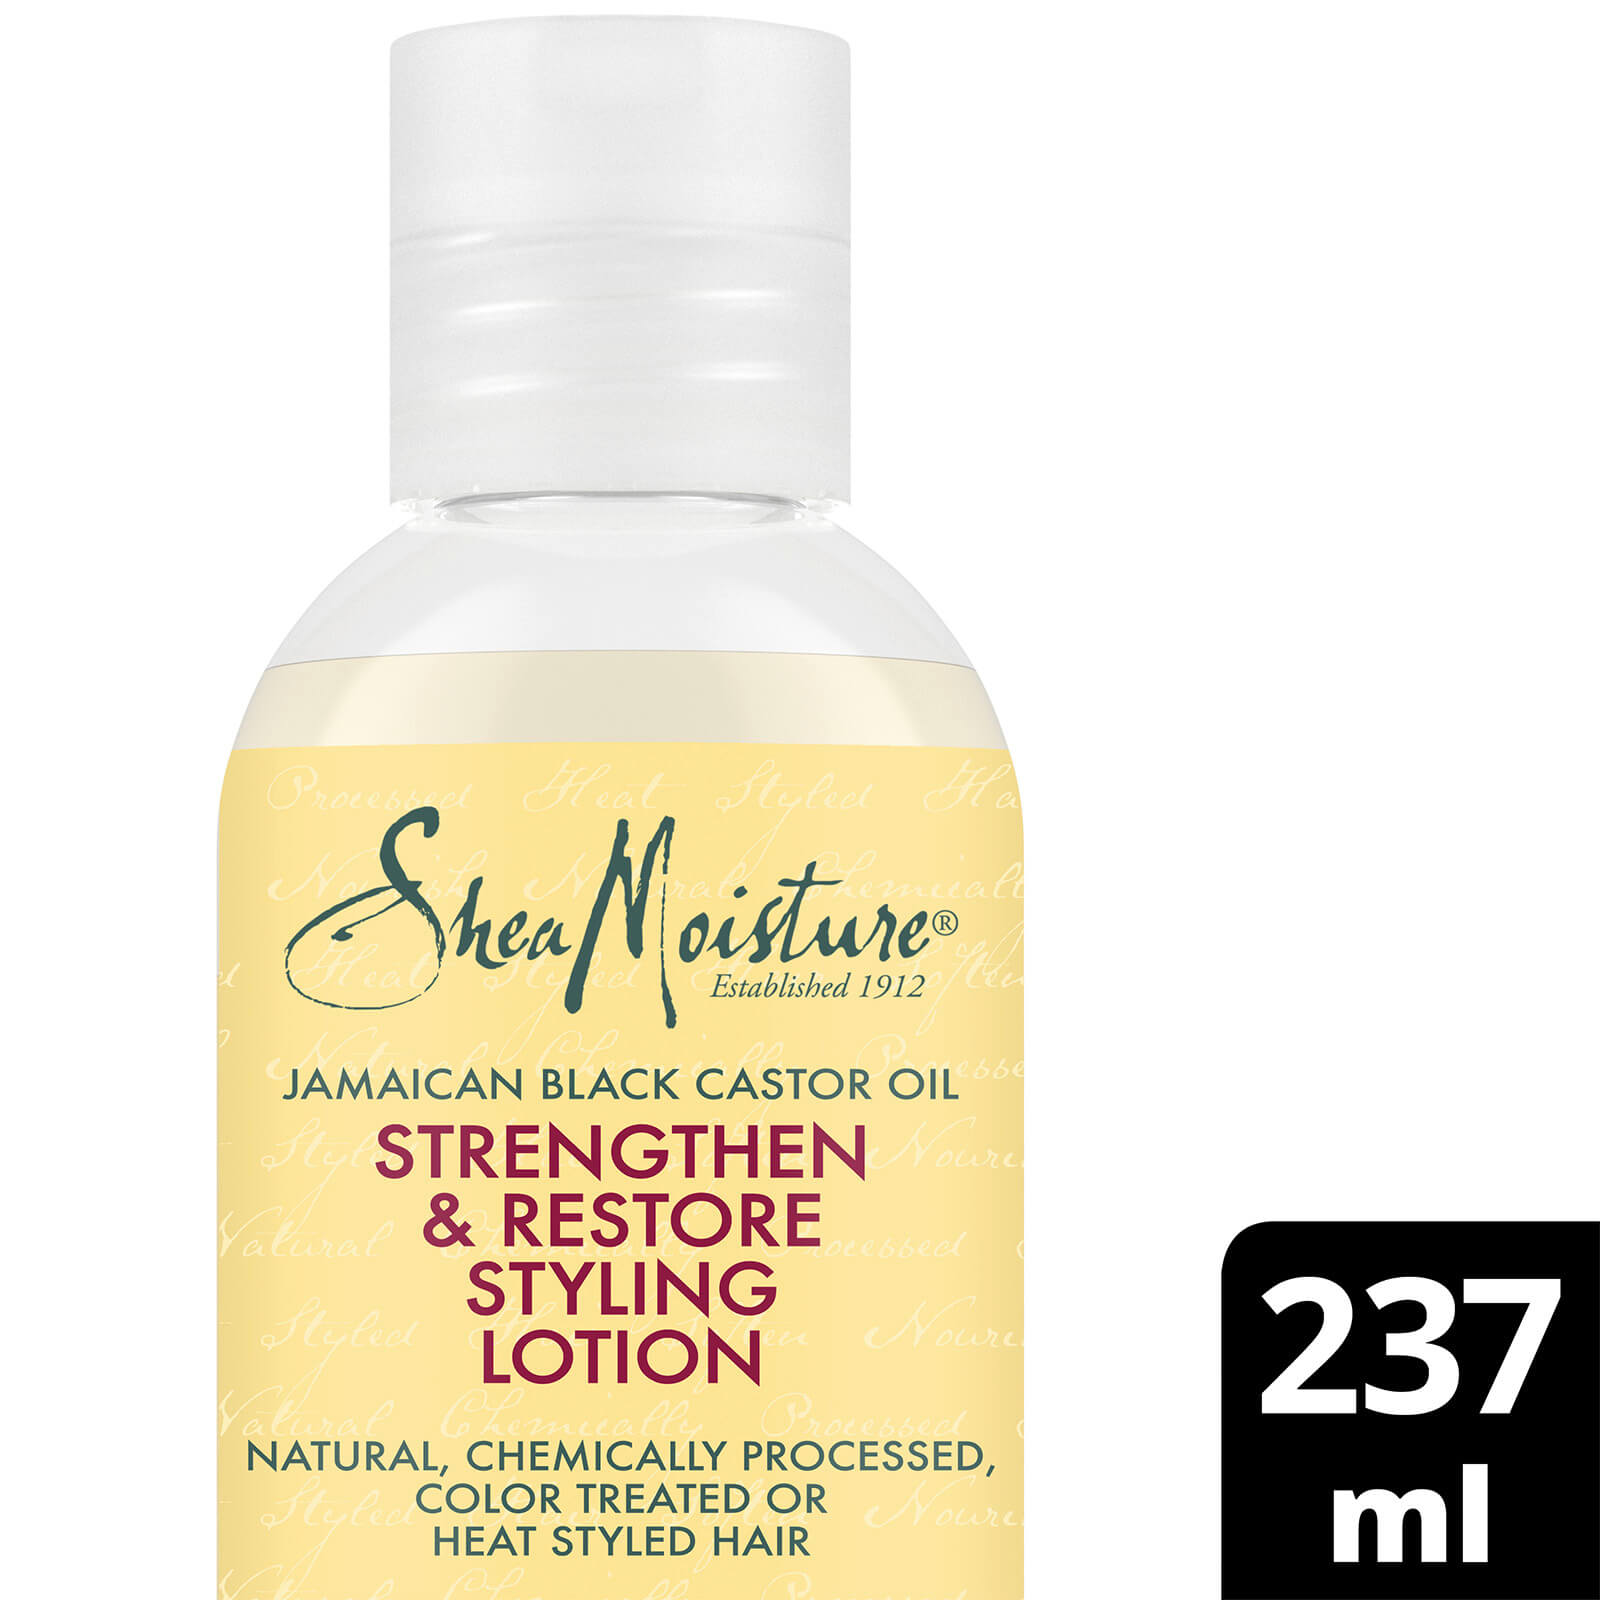 Image of Shea Moisture Jamaican Black Castor Oil Strengthen and Restore Styling Lotion 237ml